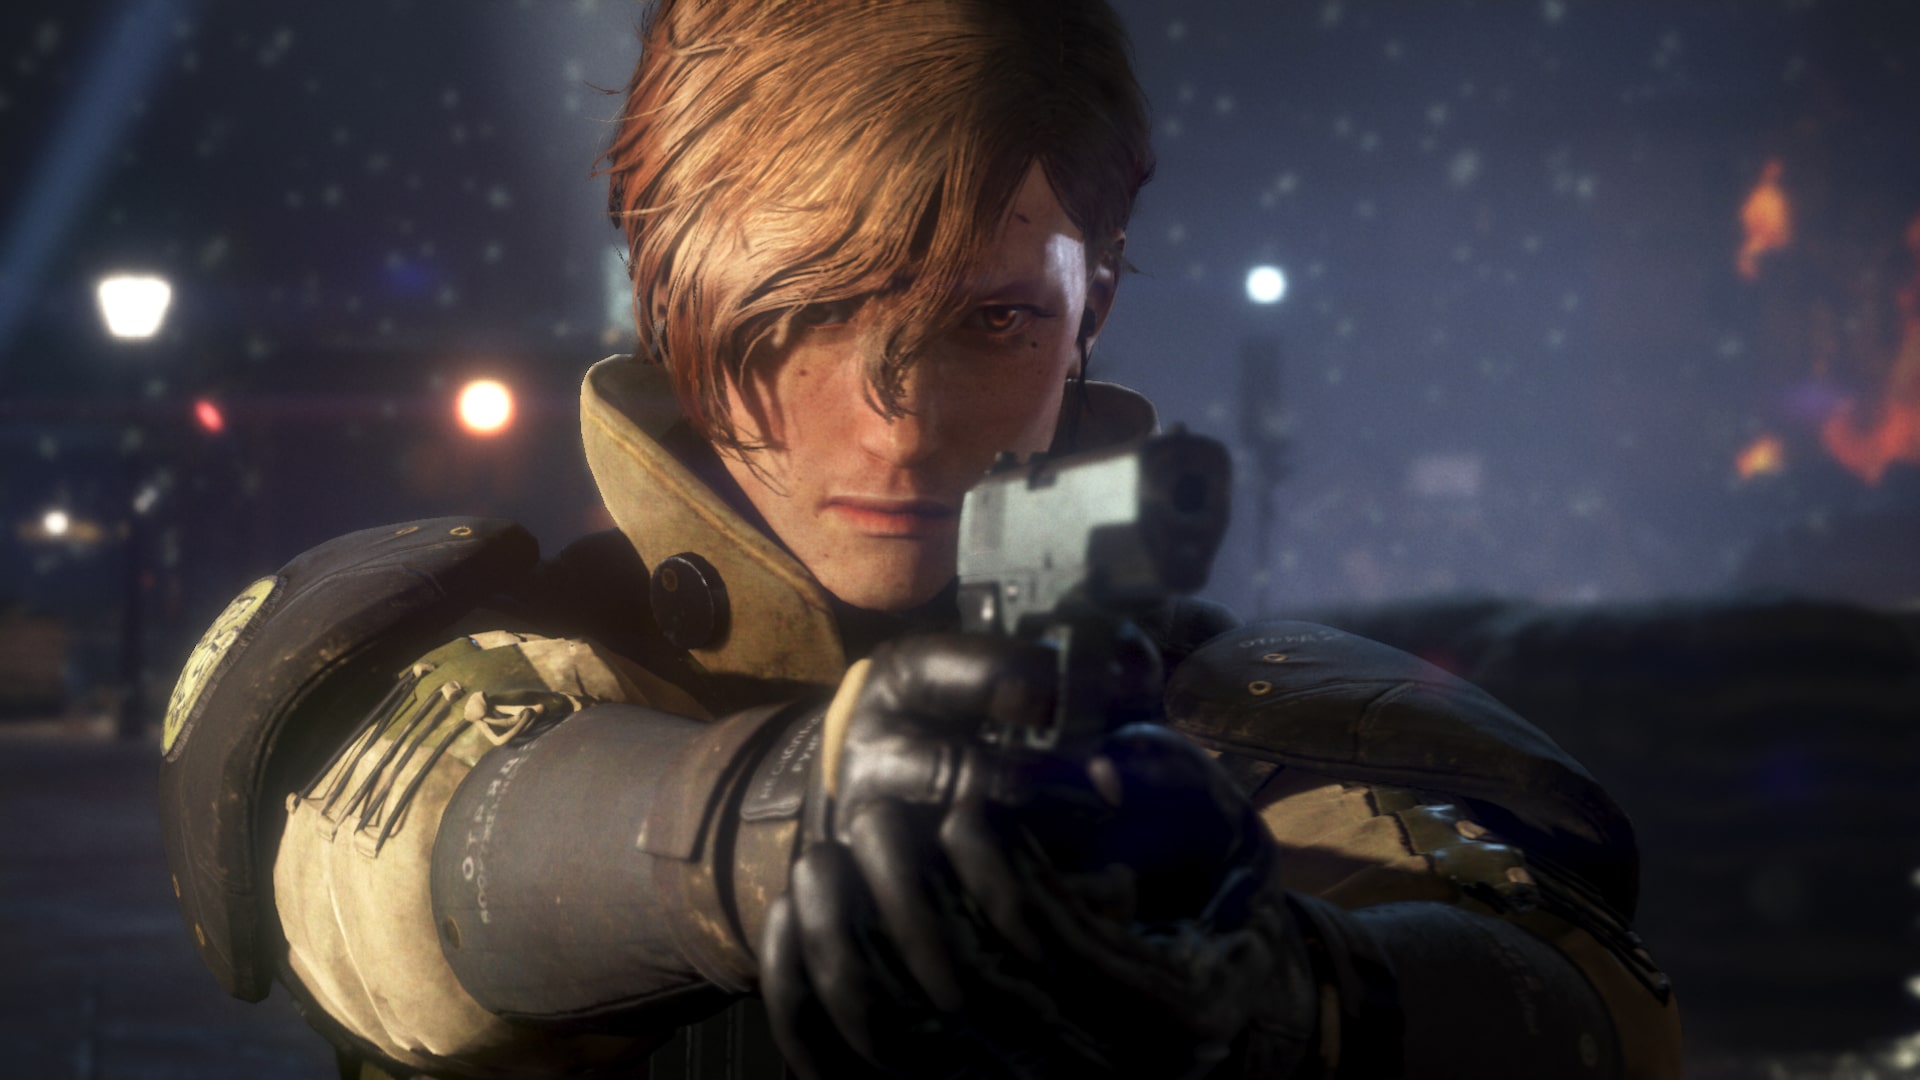 left alive day one edition ps4